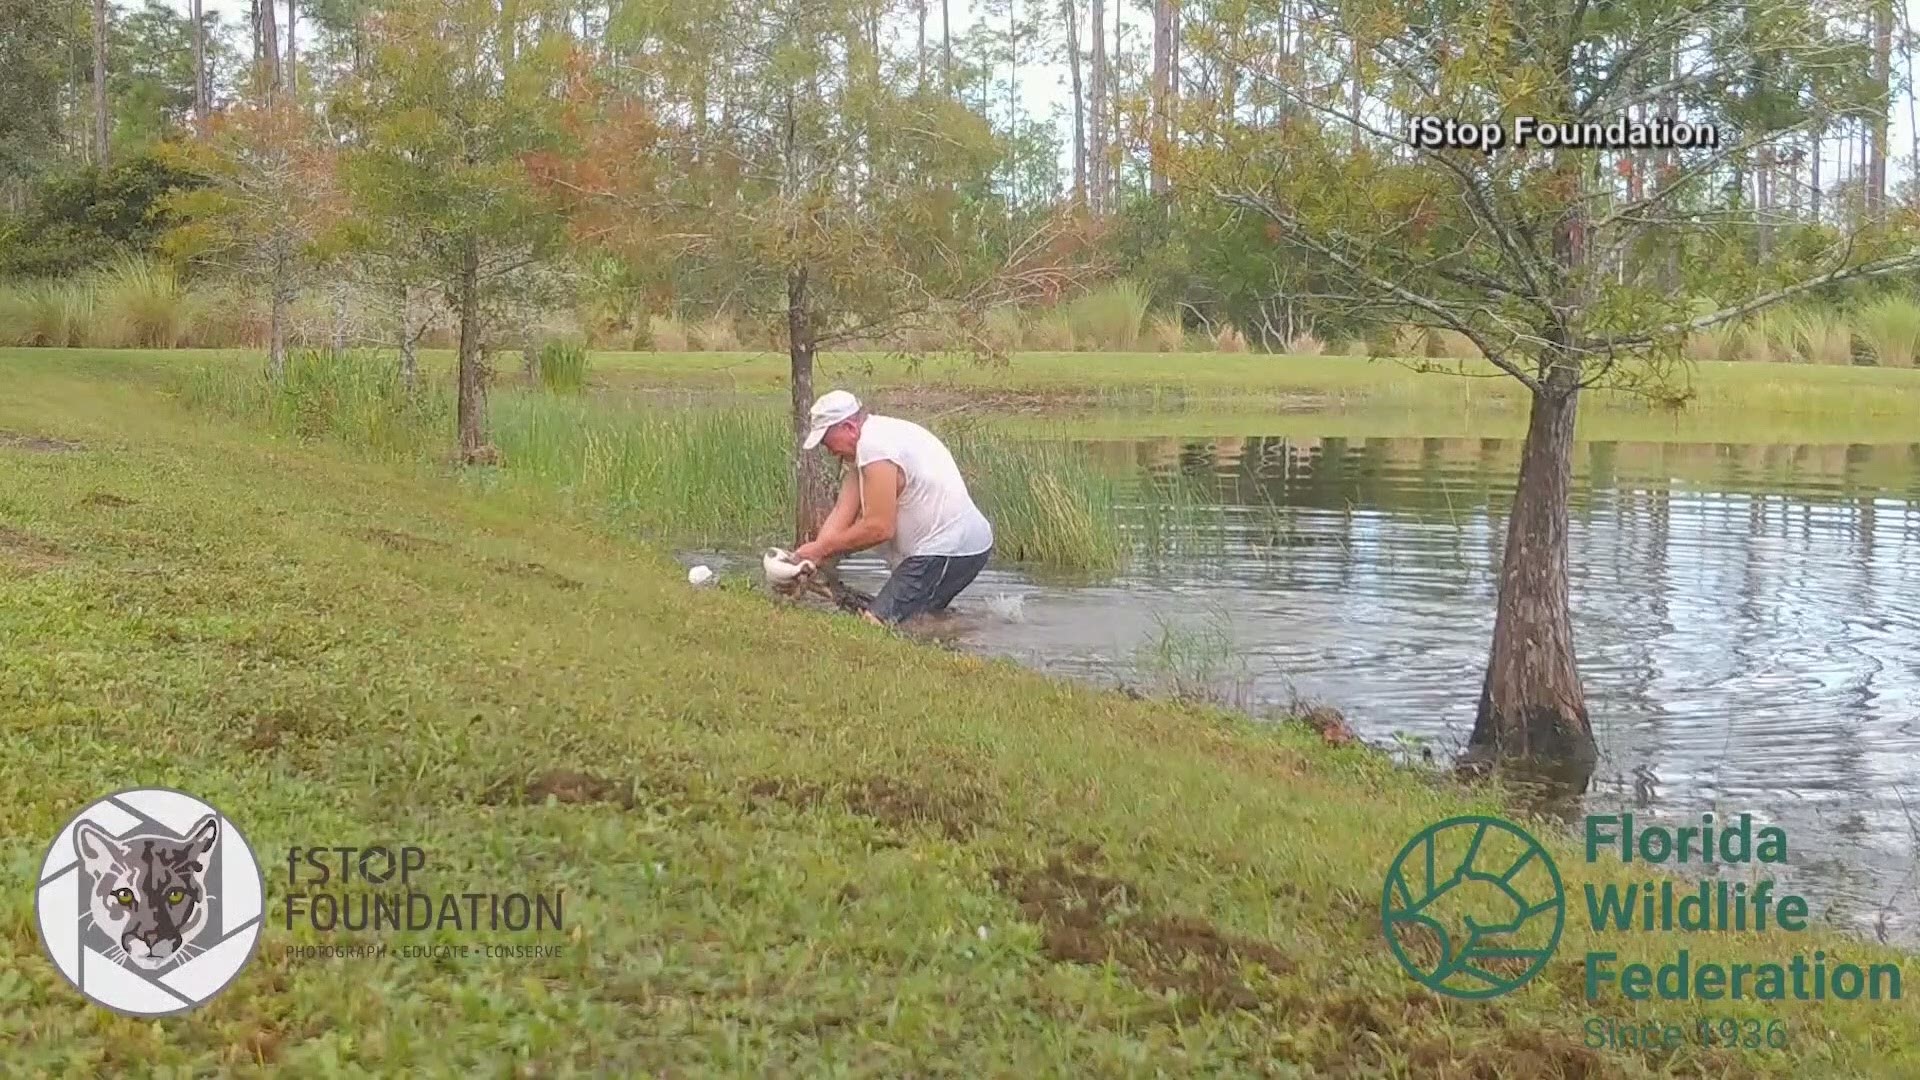 Richard Wilbanks and his wife, Louise, talk about saving their dog from the jaws of a gator.